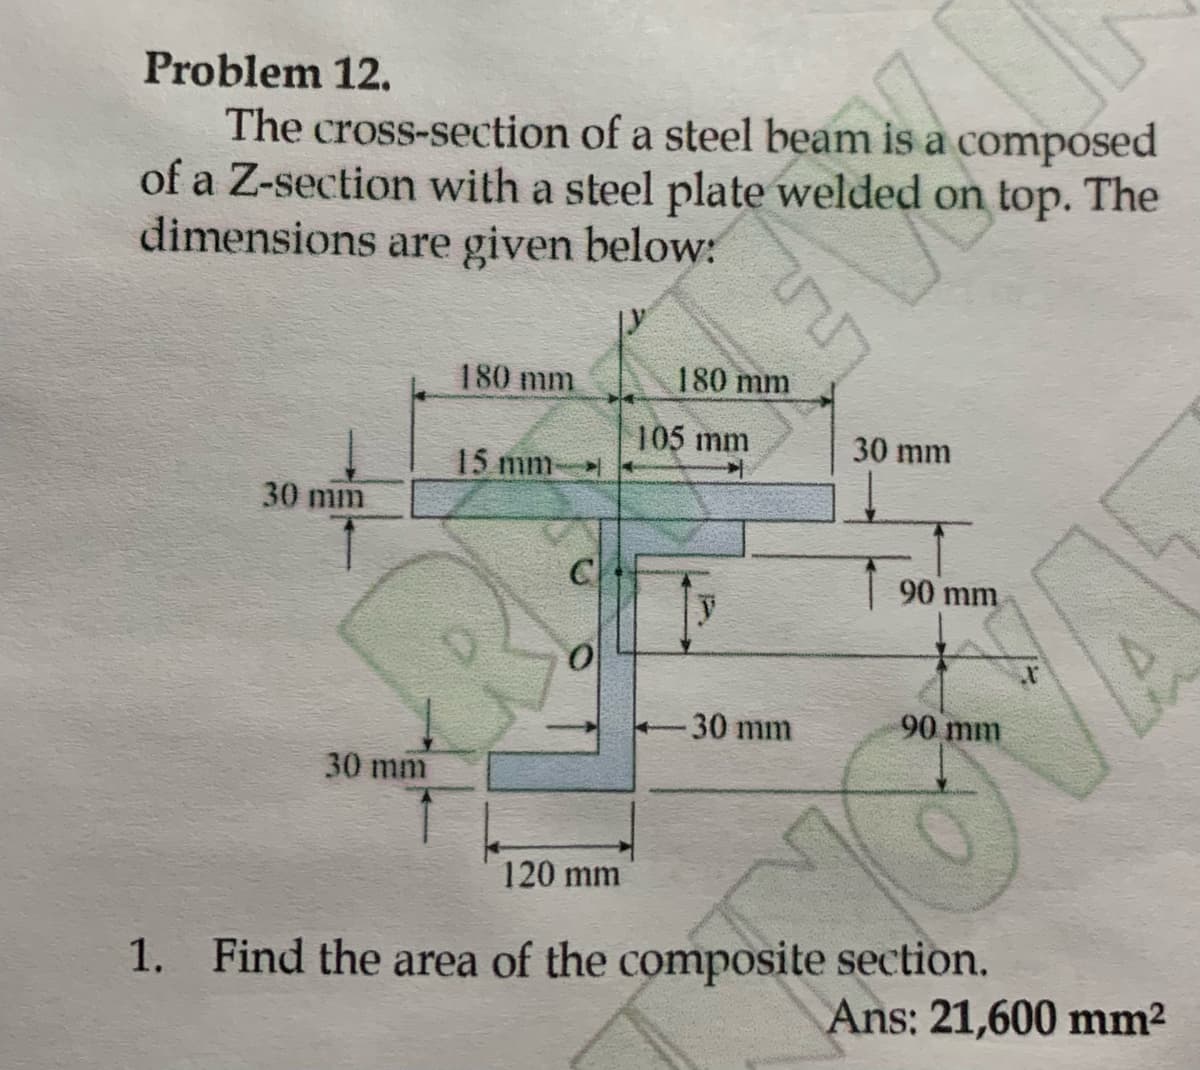 Problem 12.
is a com
The cross-section of a steel beam is a composed
of a Z-section with a steel plate welded on top. The
dimensions are given below:
30 mm
30 mm
180 mm
15 mm-
C
0
120 mm
180 mm
105 mm
y
- 30 mm
30 mm
90 mm
90 mm
1. Find the area of the composite section.
Ans: 21,600 mm²